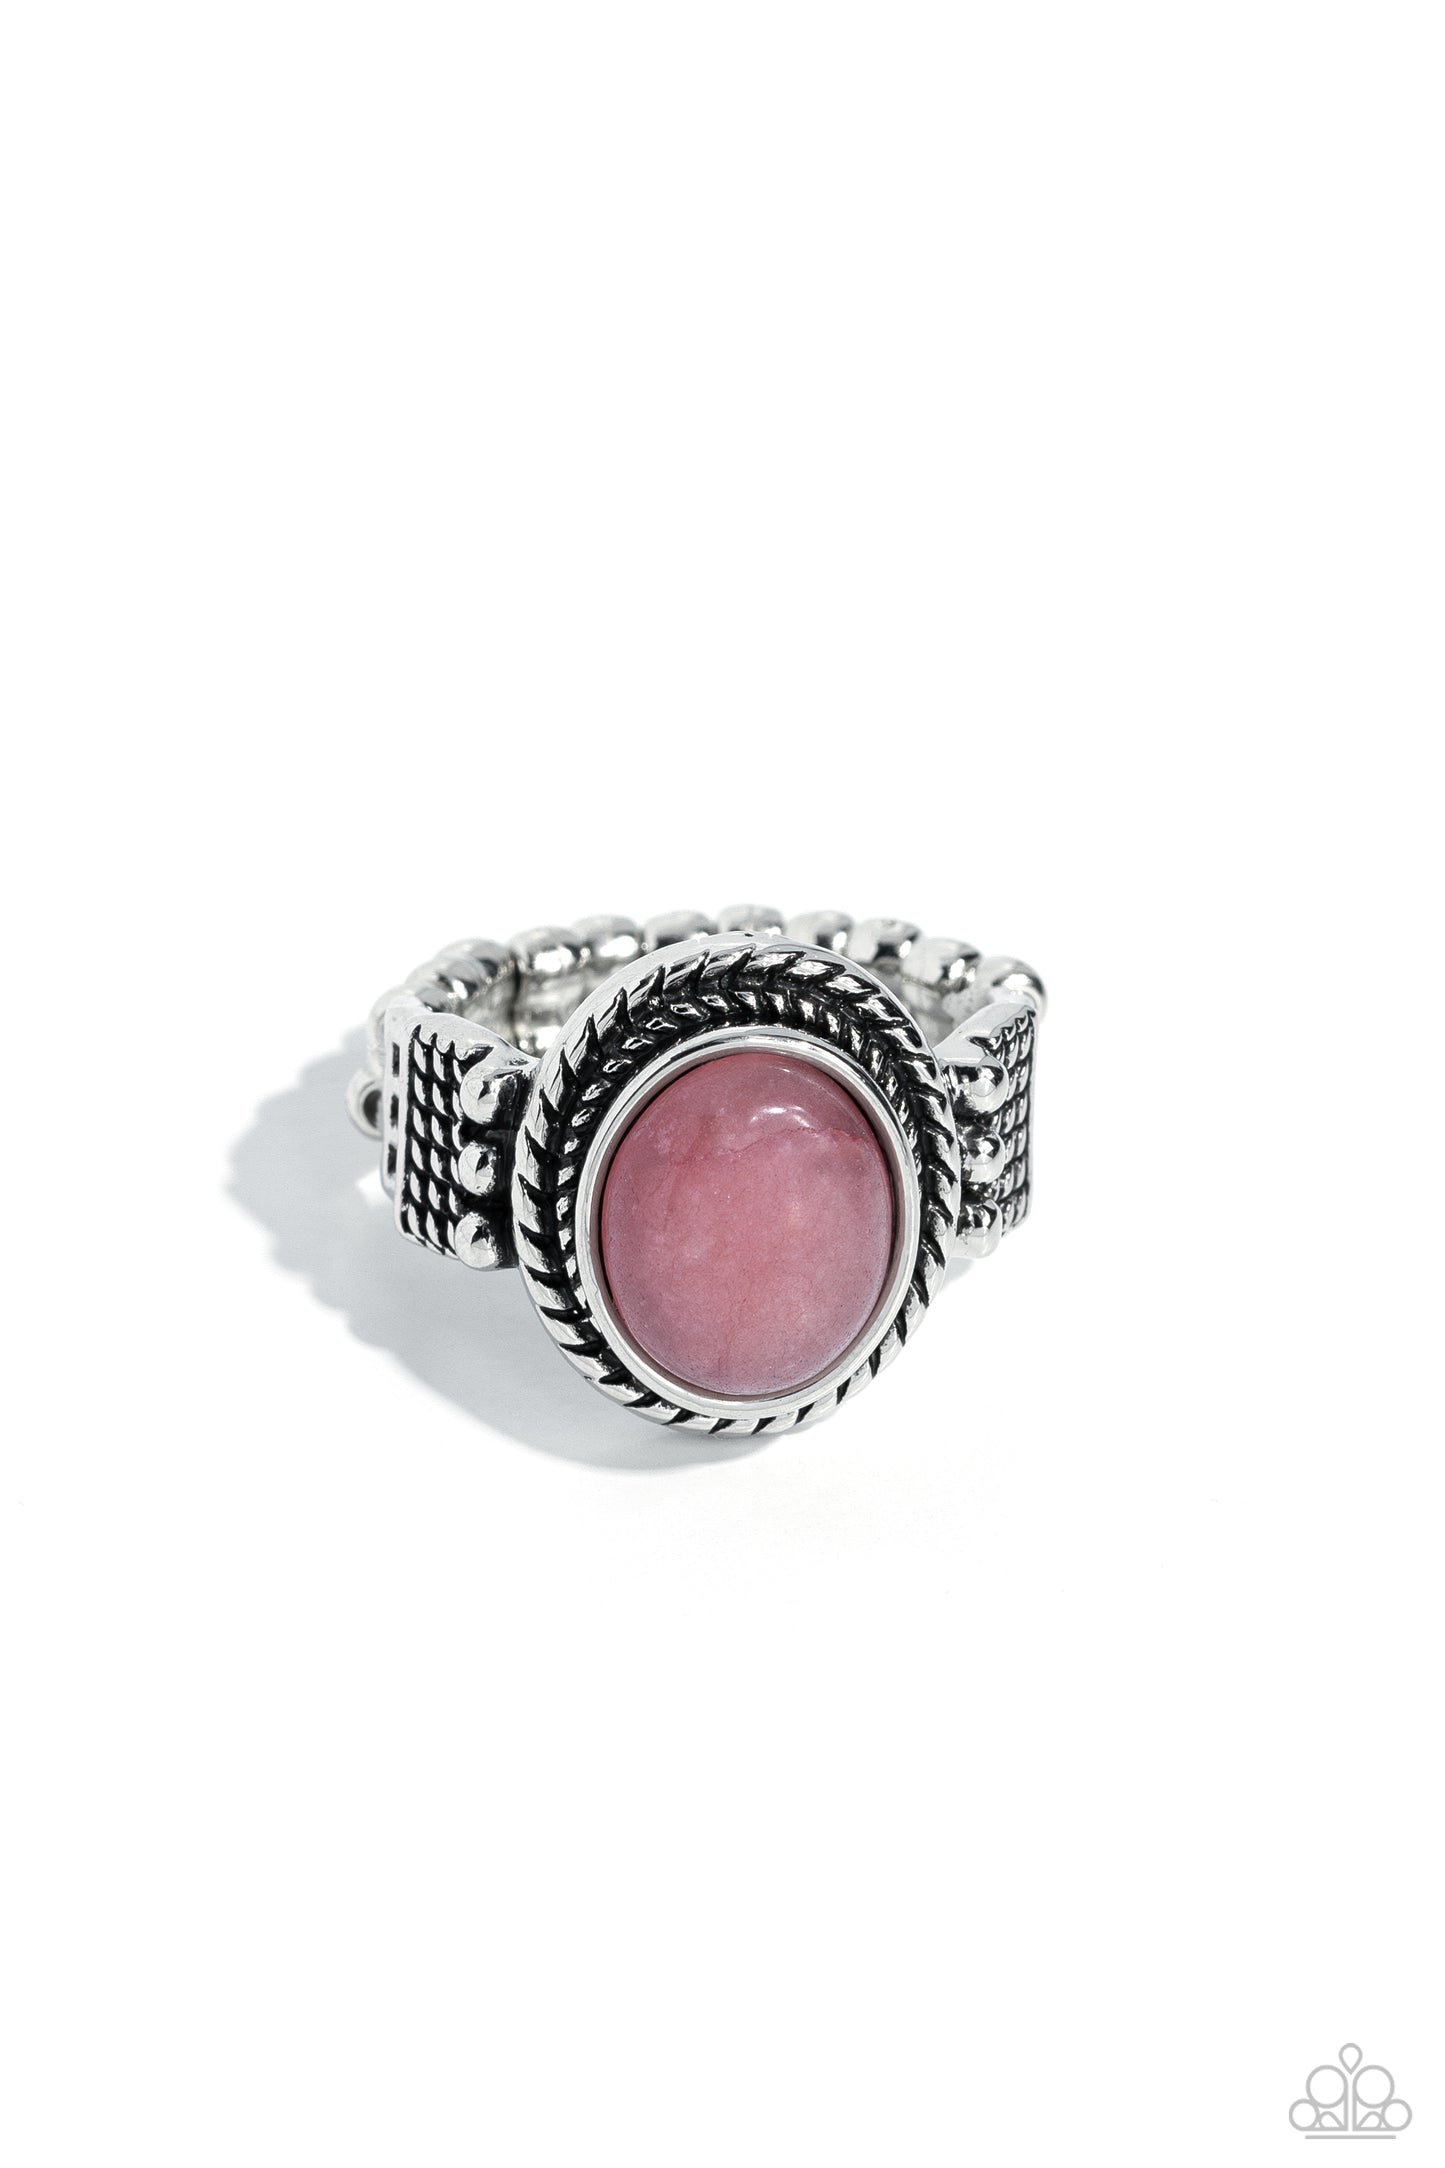 Ranch Ready Paparazzi Accessories Ring - Pink